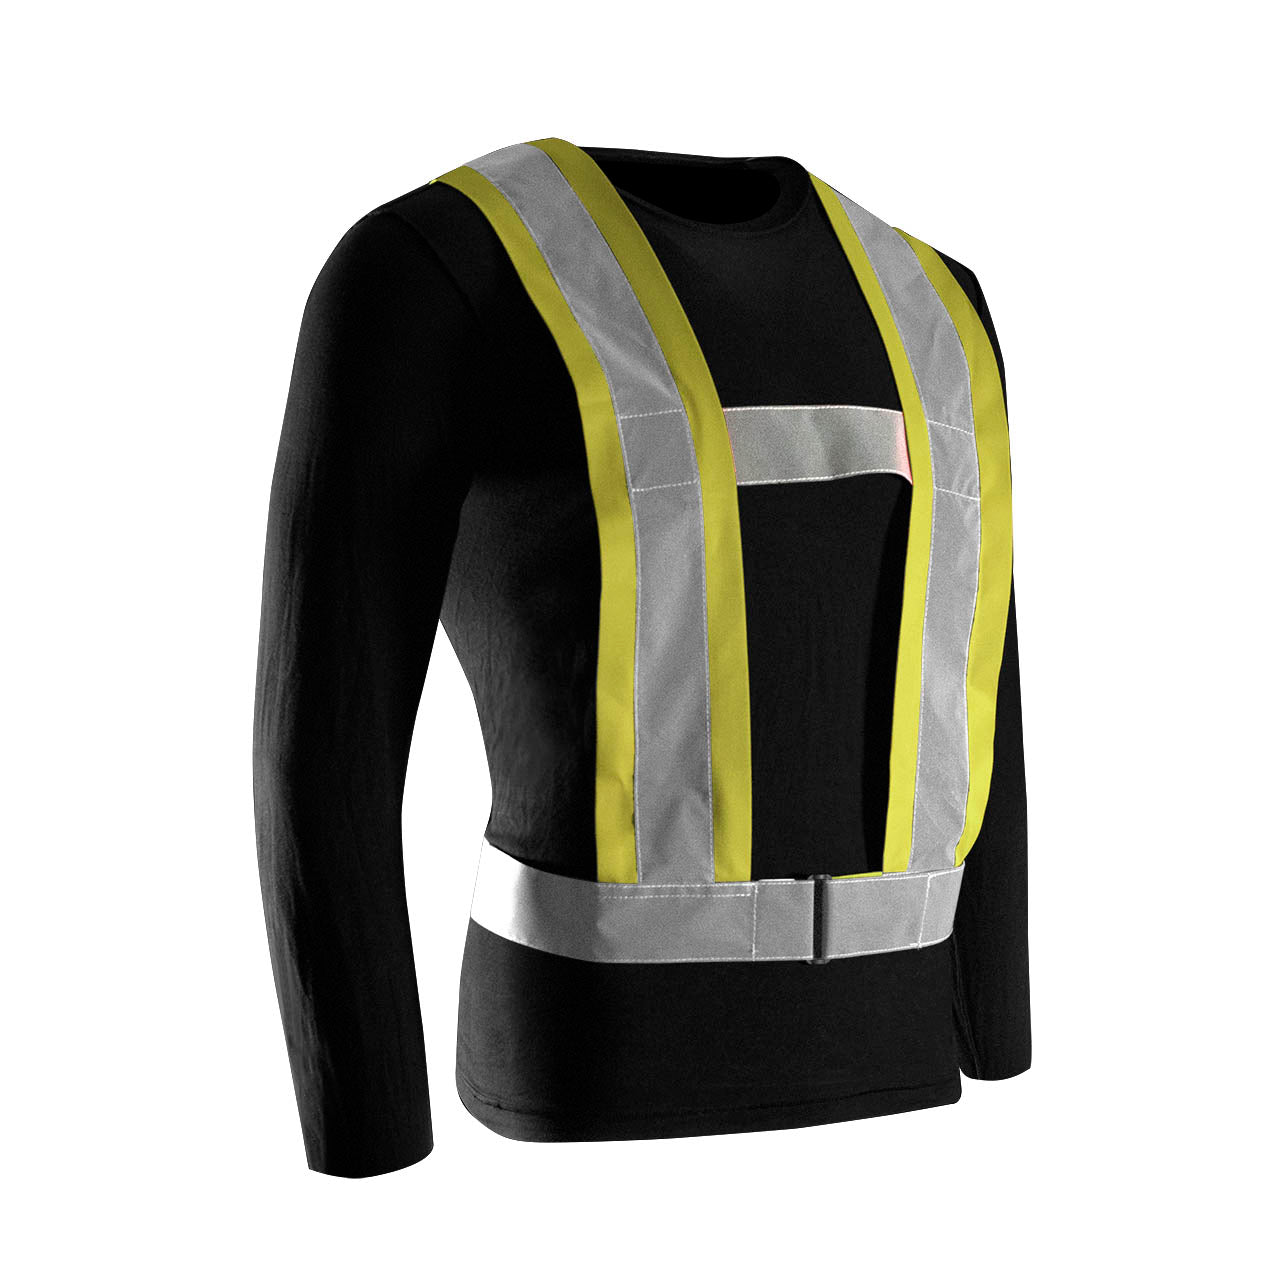 Lime CSA Tricot Traffic Sash with 4" Reflective Tape